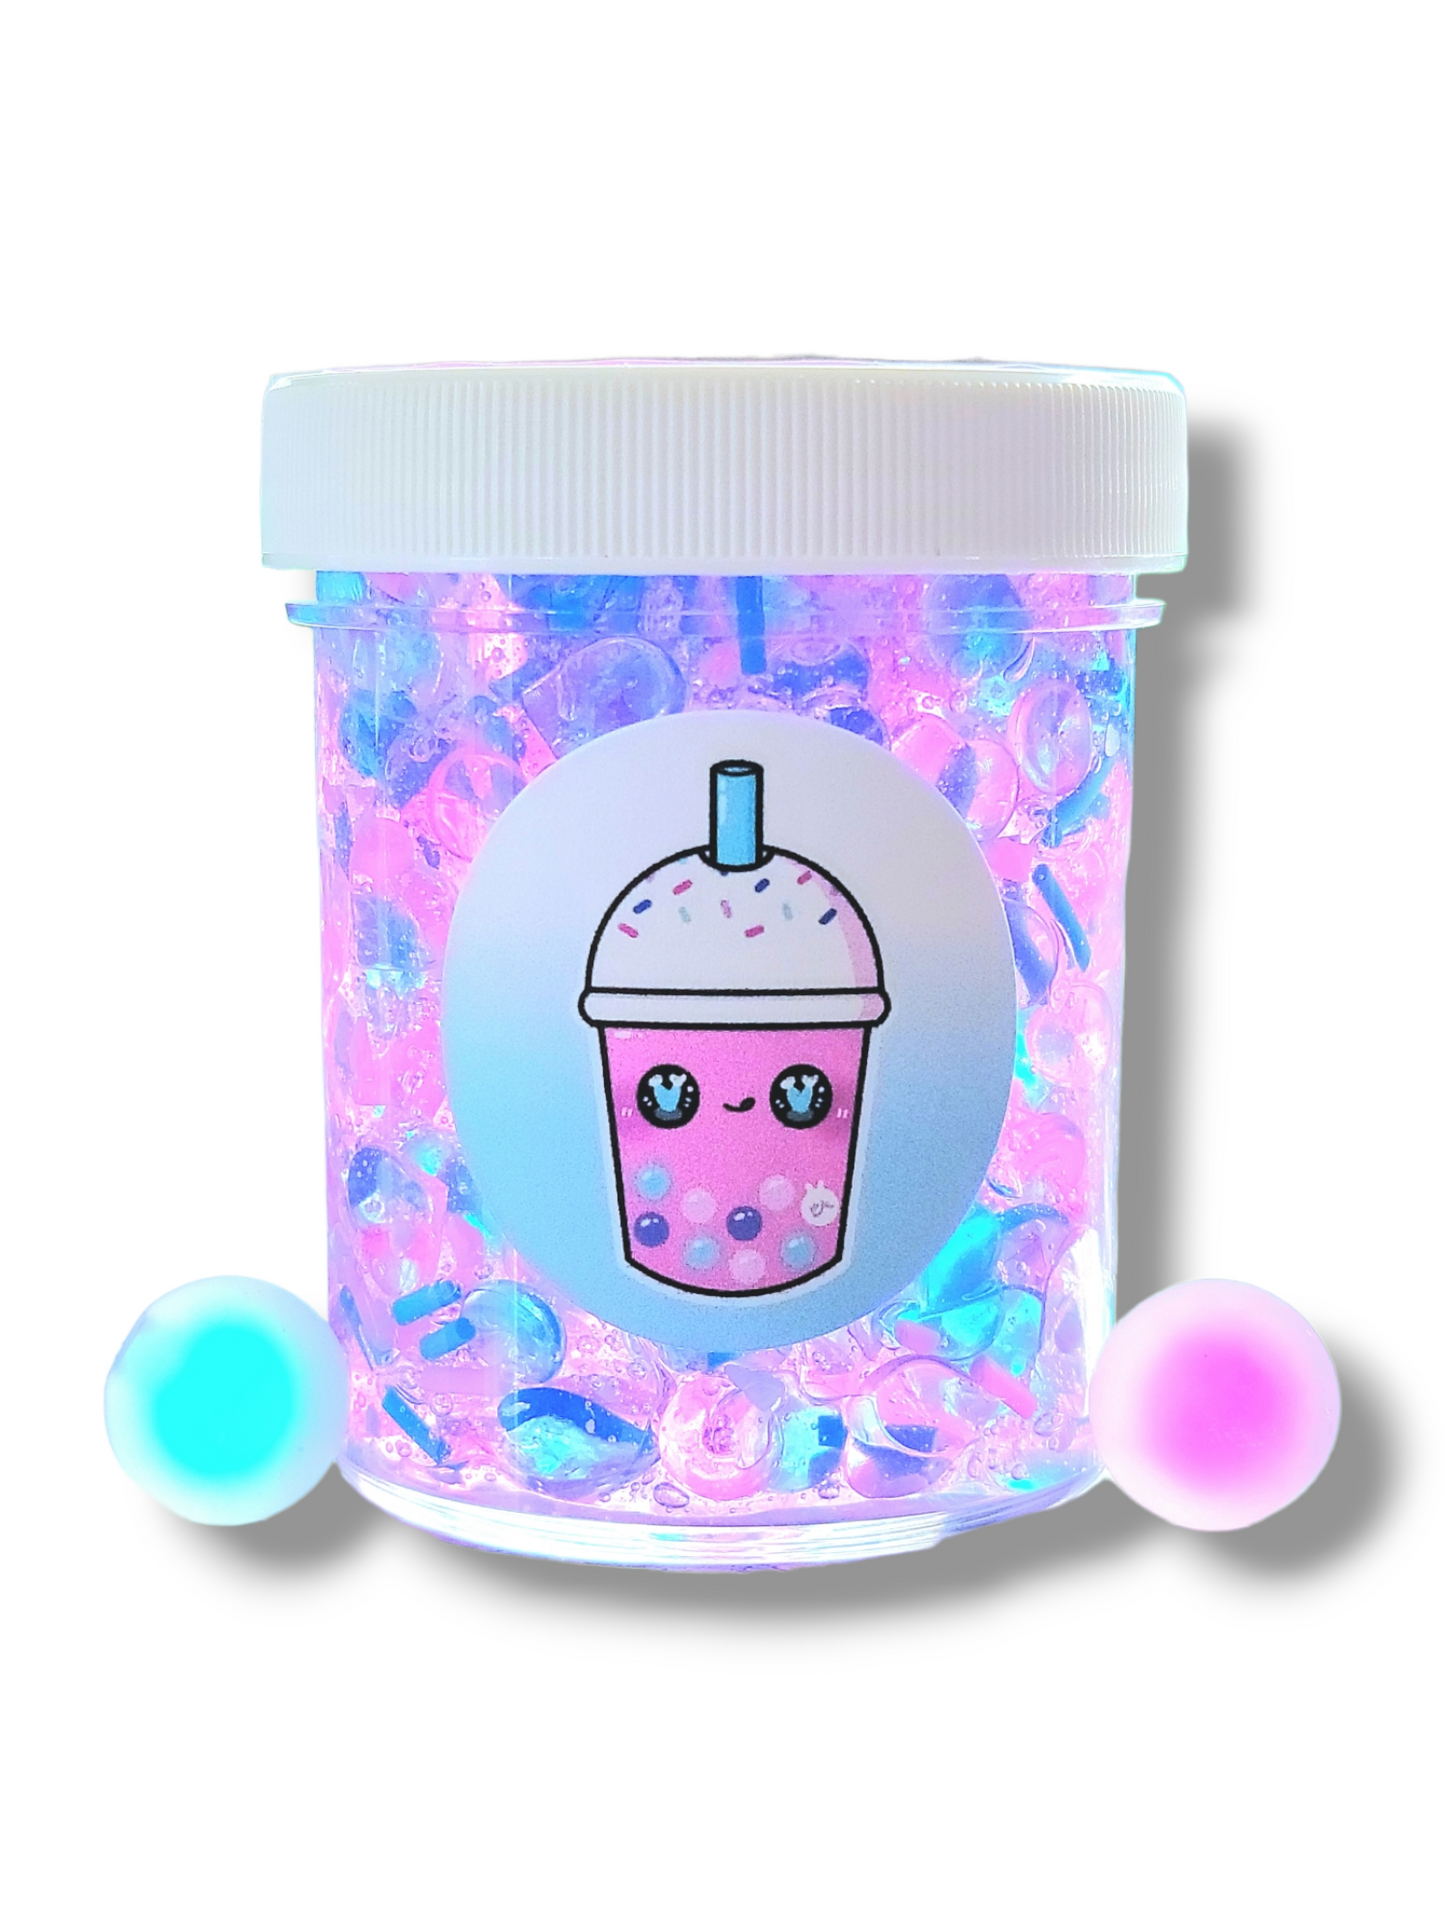 Cotton Candy Popping Boba Handmade Slime 4oz Slime by Hoshimi Slimes LLC | Hoshimi Slimes LLC